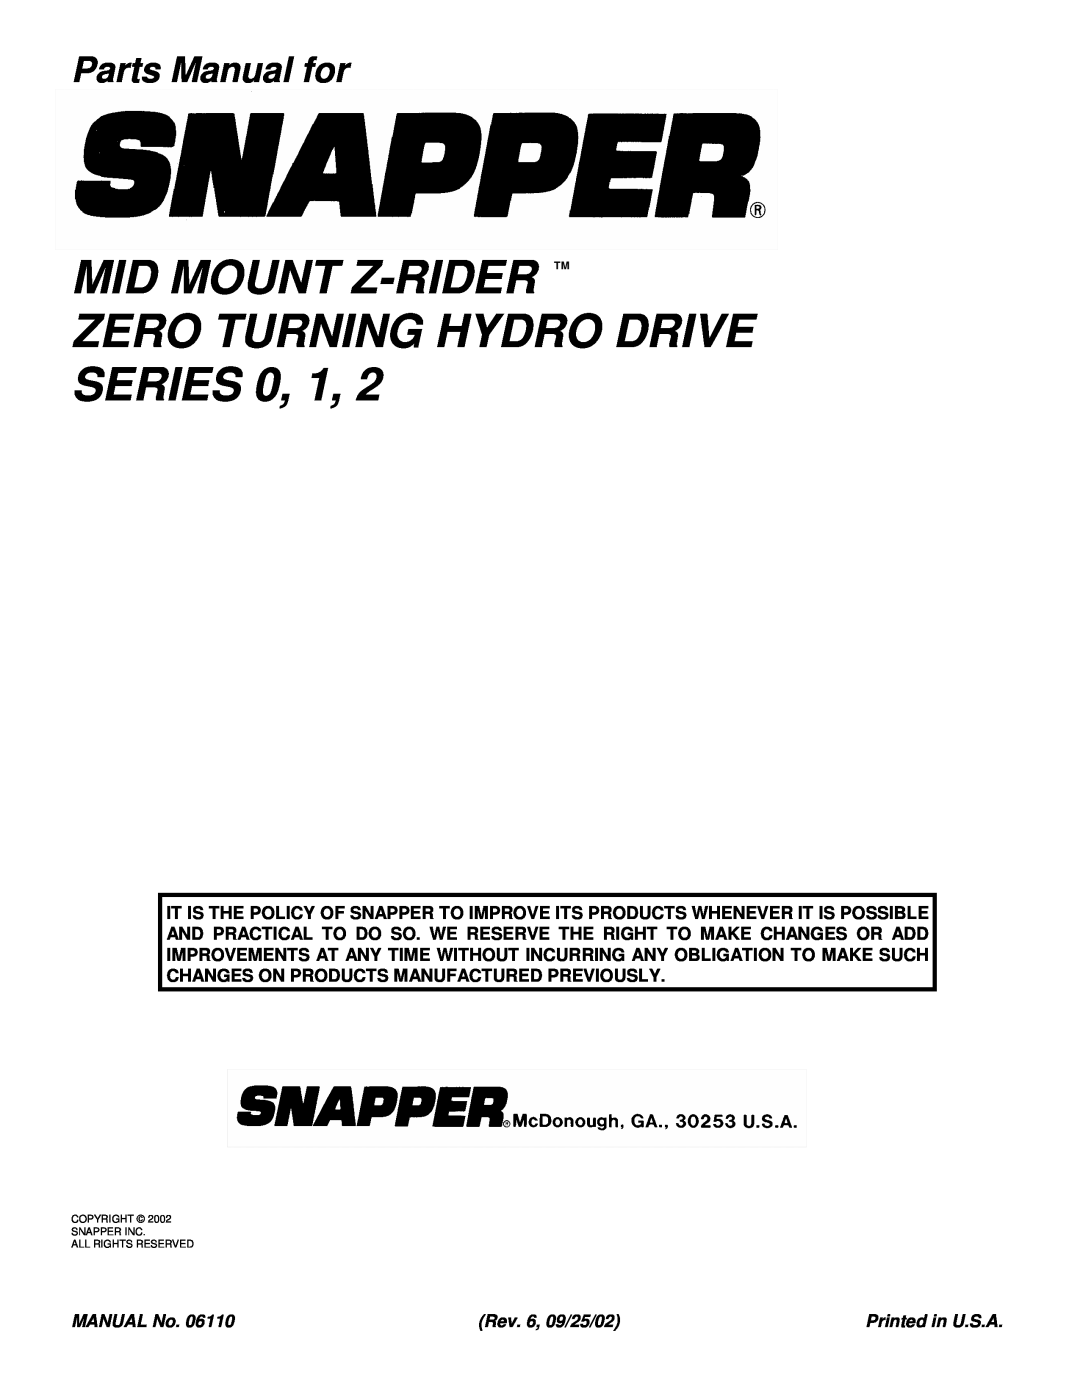 Snapper MZM2200KH Series, Mid Mount Z-Rider Tm Zero Turning Hydro Drive, Parts Manual for, MANUAL No, Rev. 6, 09/25/02 